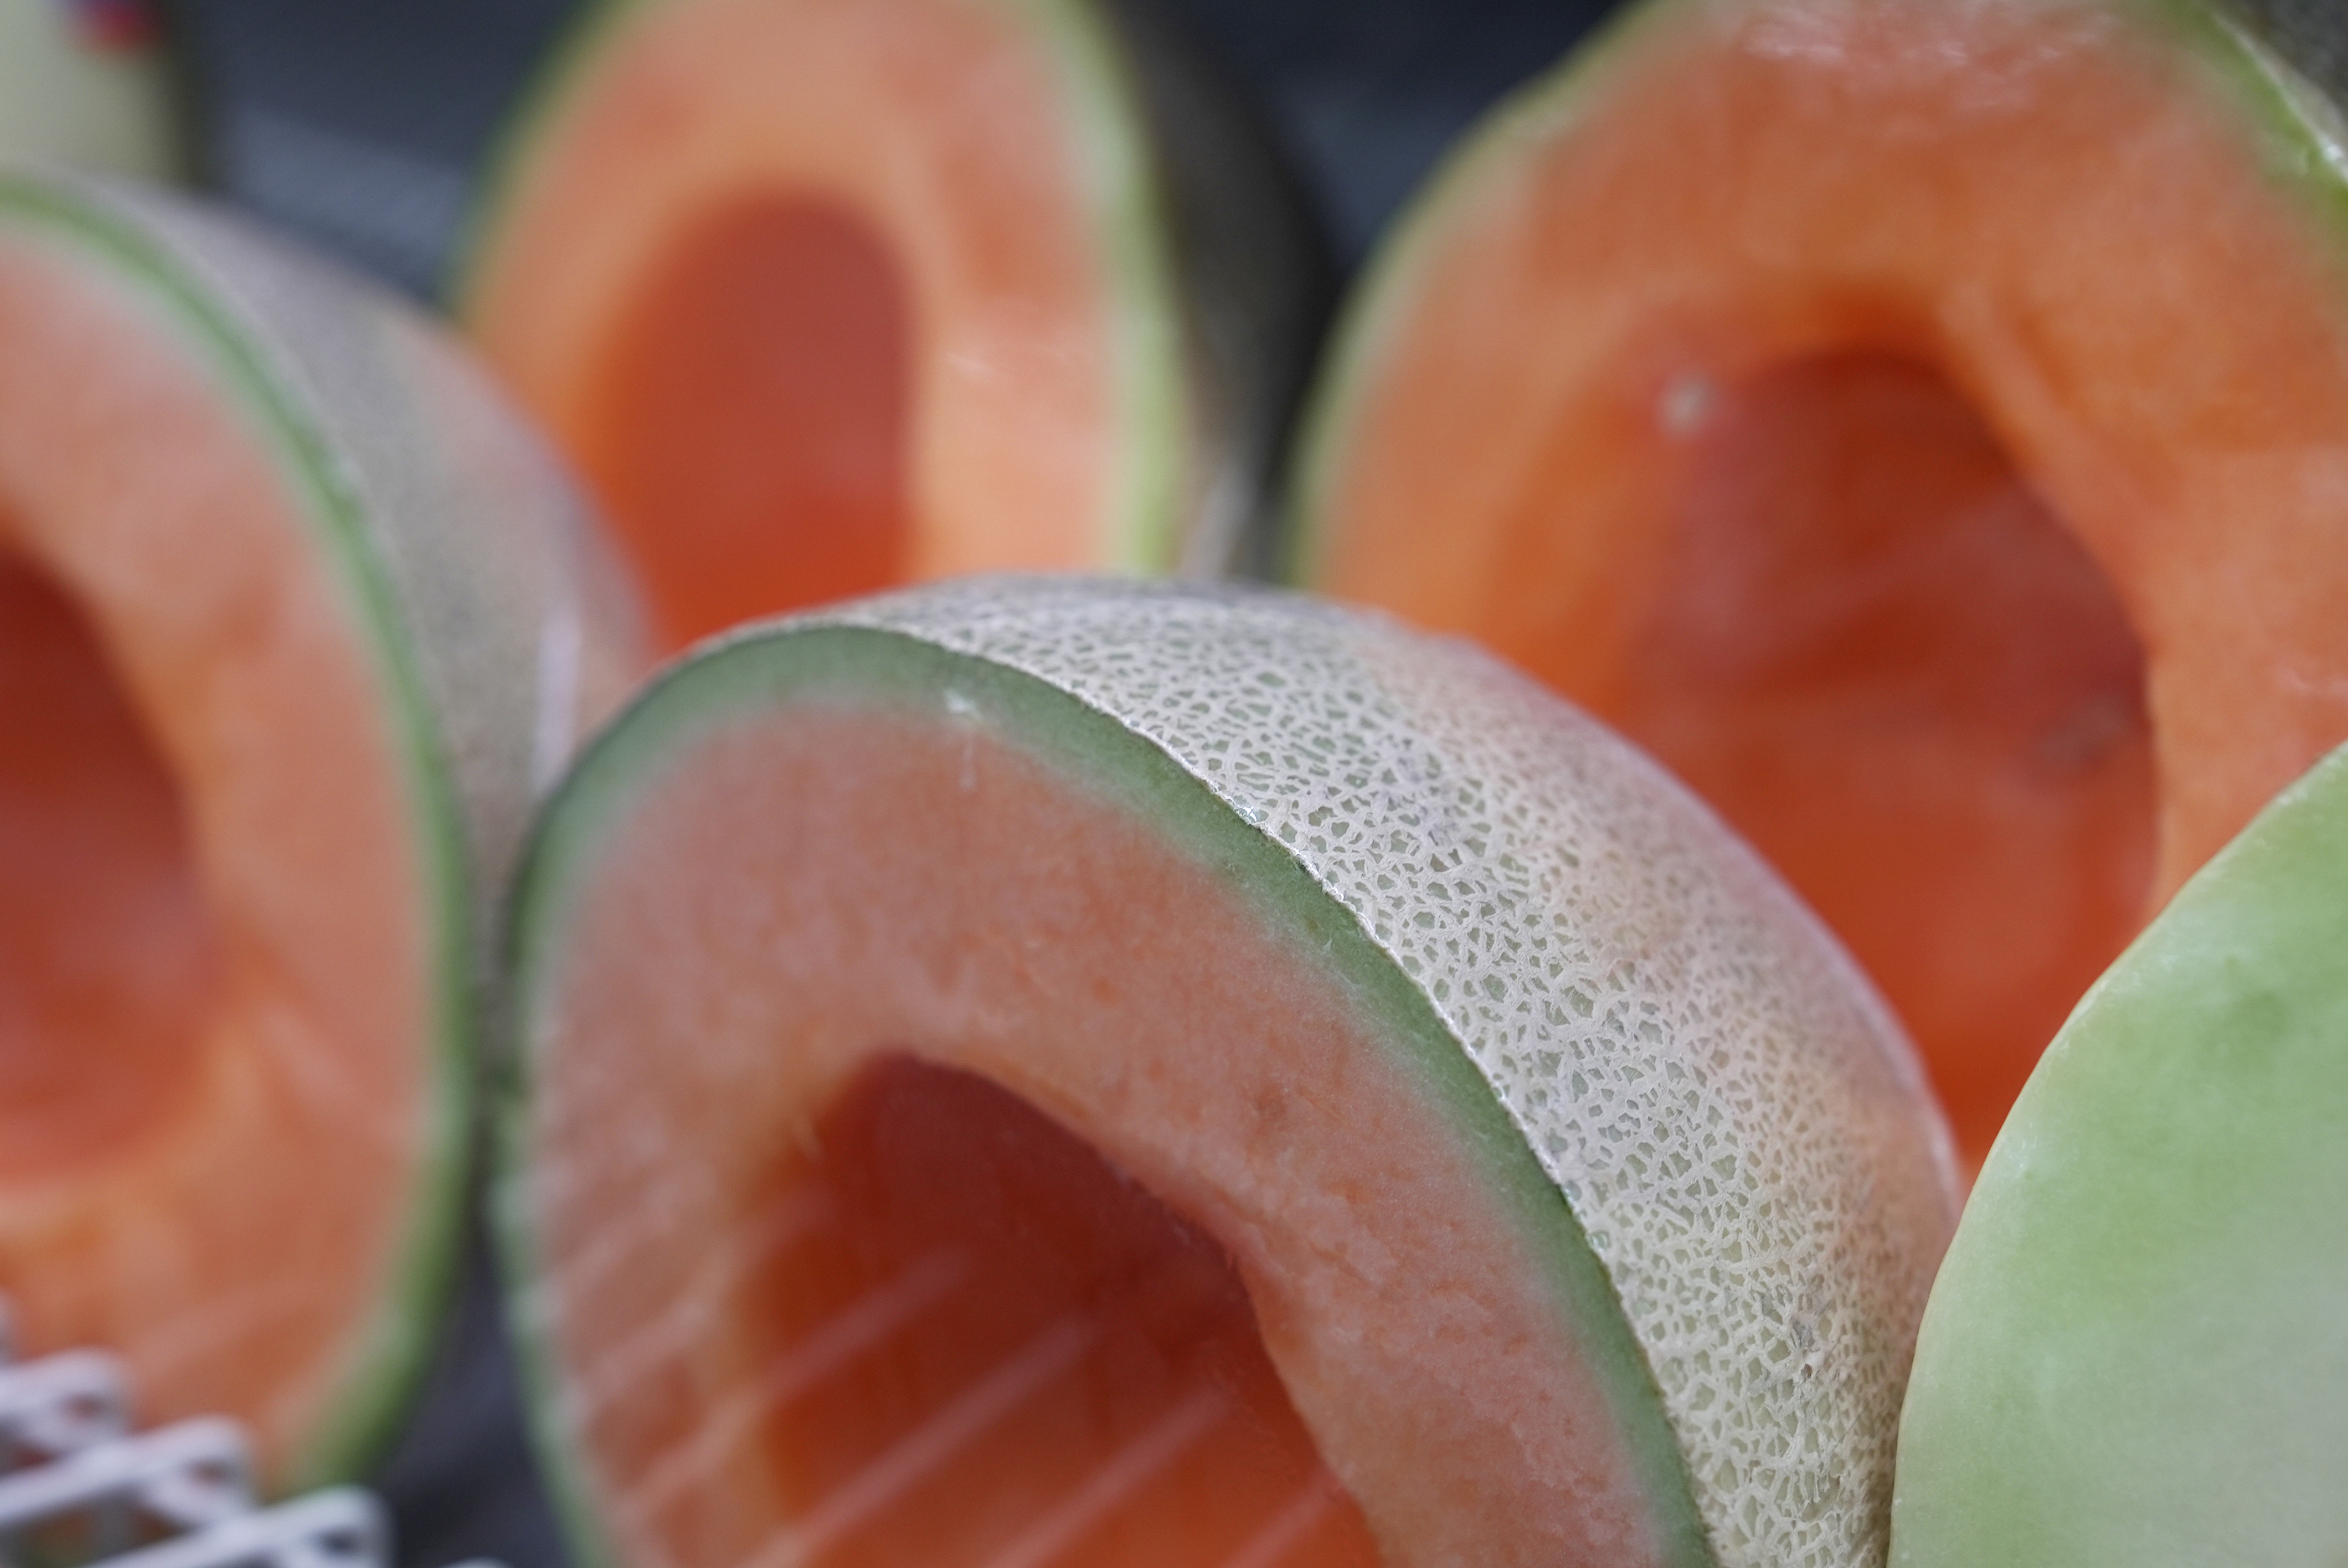 7th Canadian dies from cantaloupe salmonella outbreak, PHAC says